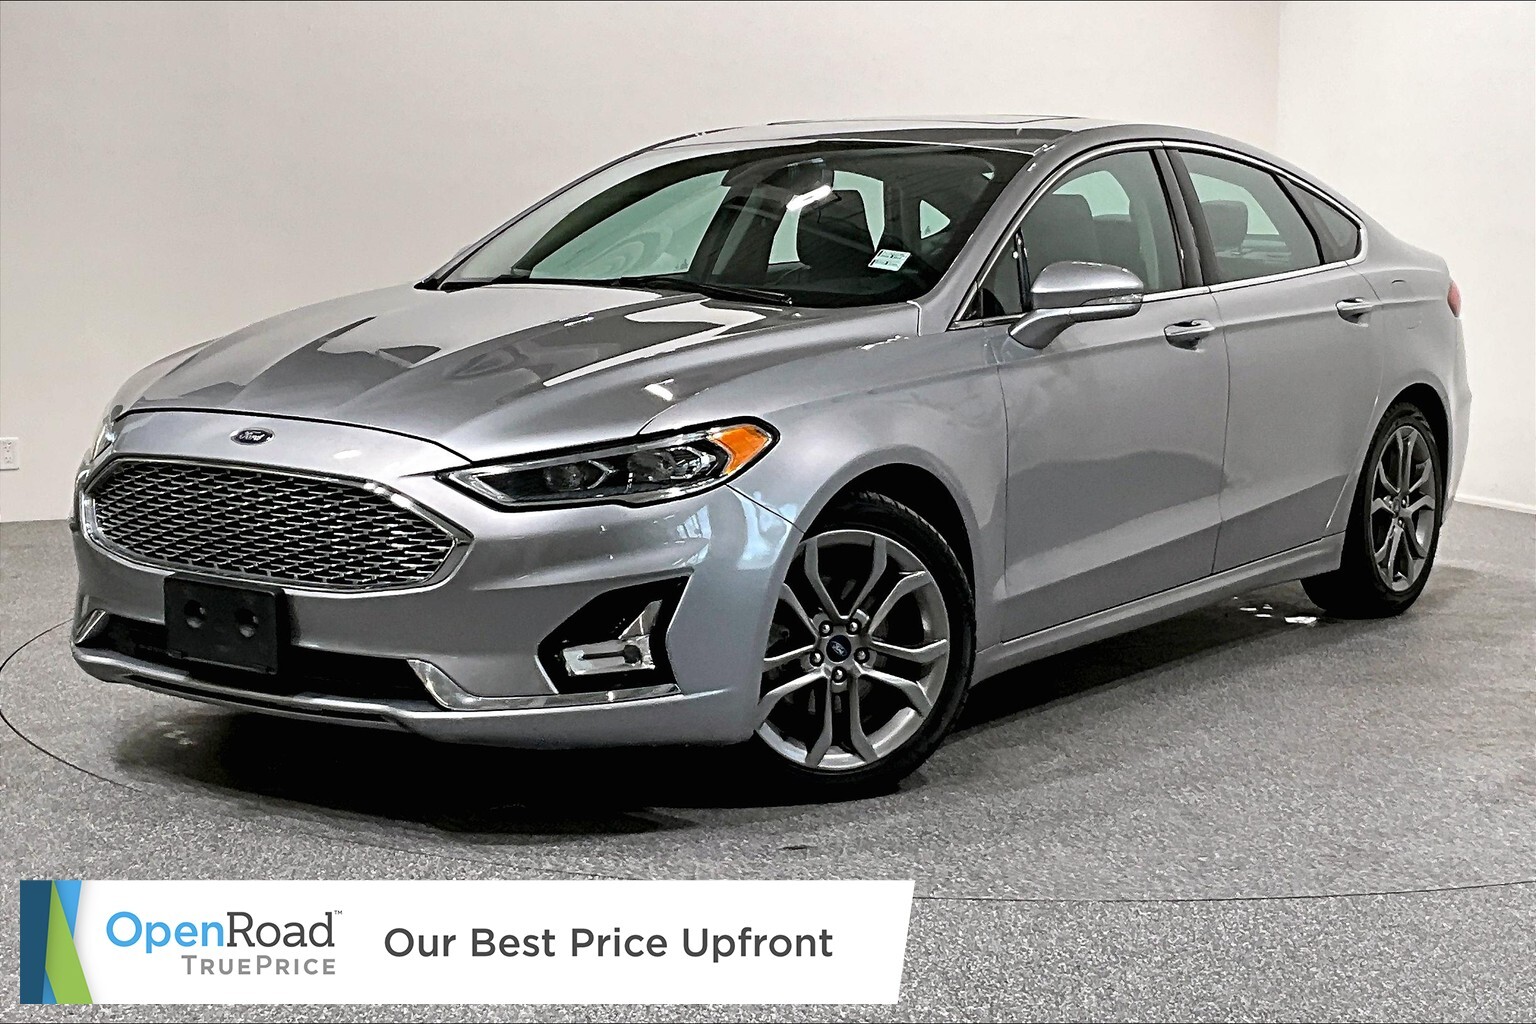 2020 Ford Fusion Titanium HEV | HYBRID | NO ACCIDENT CLAIMS | OPENR